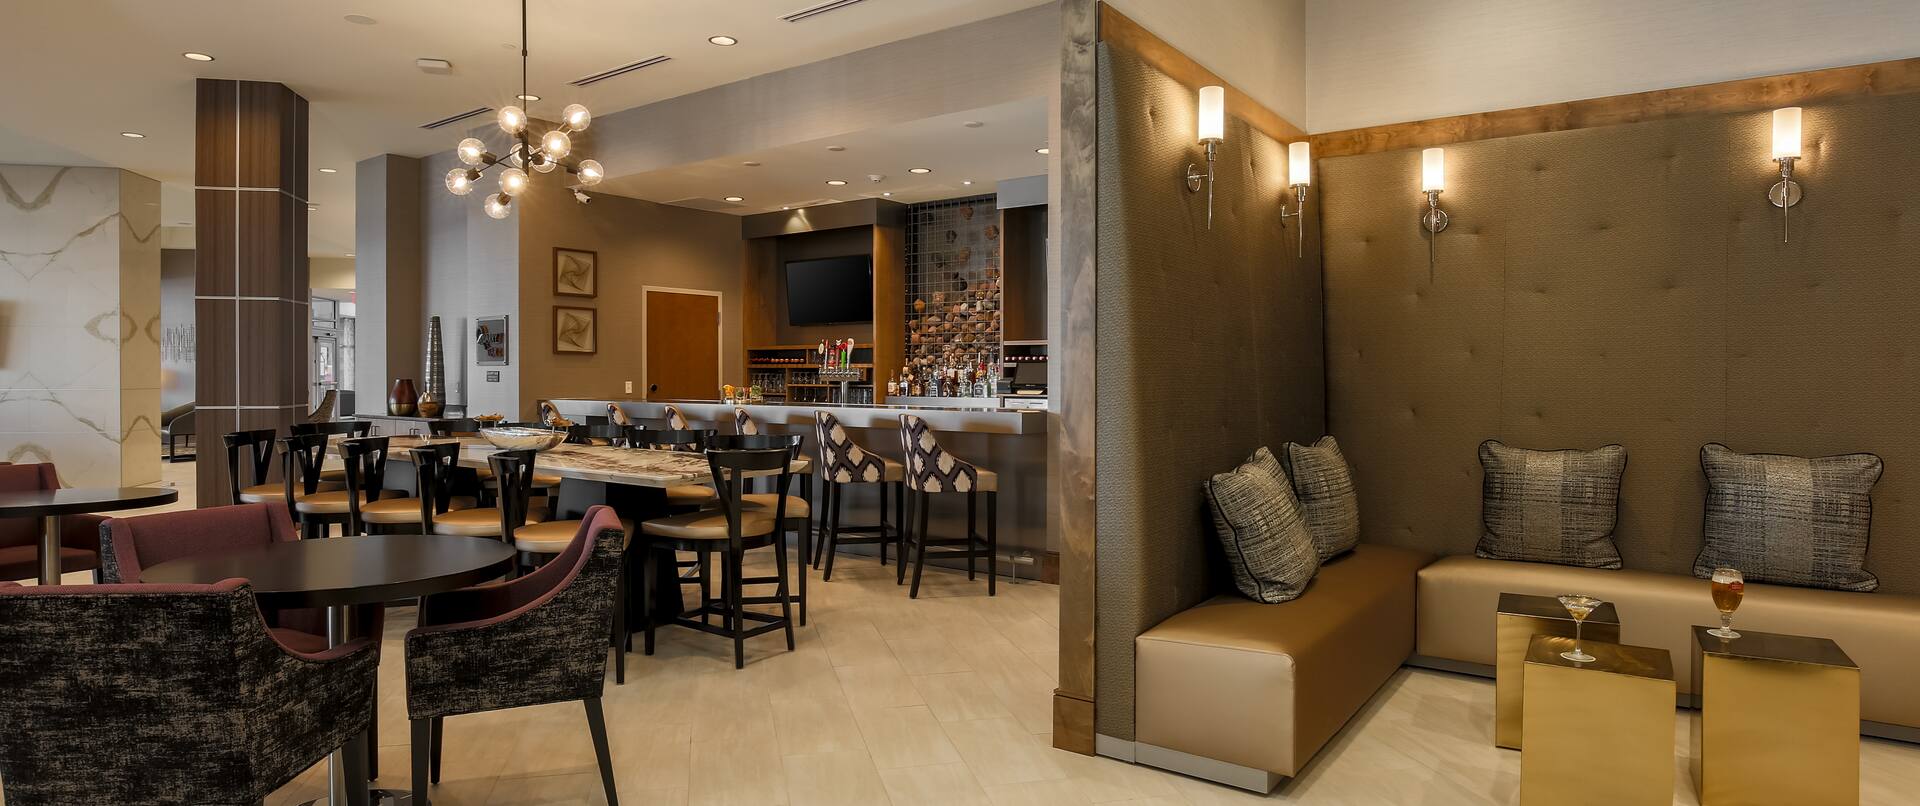 Soft Seating and Tables in Lounge Area With Counter Seating and TV at Fully Stocked Quarry Bar